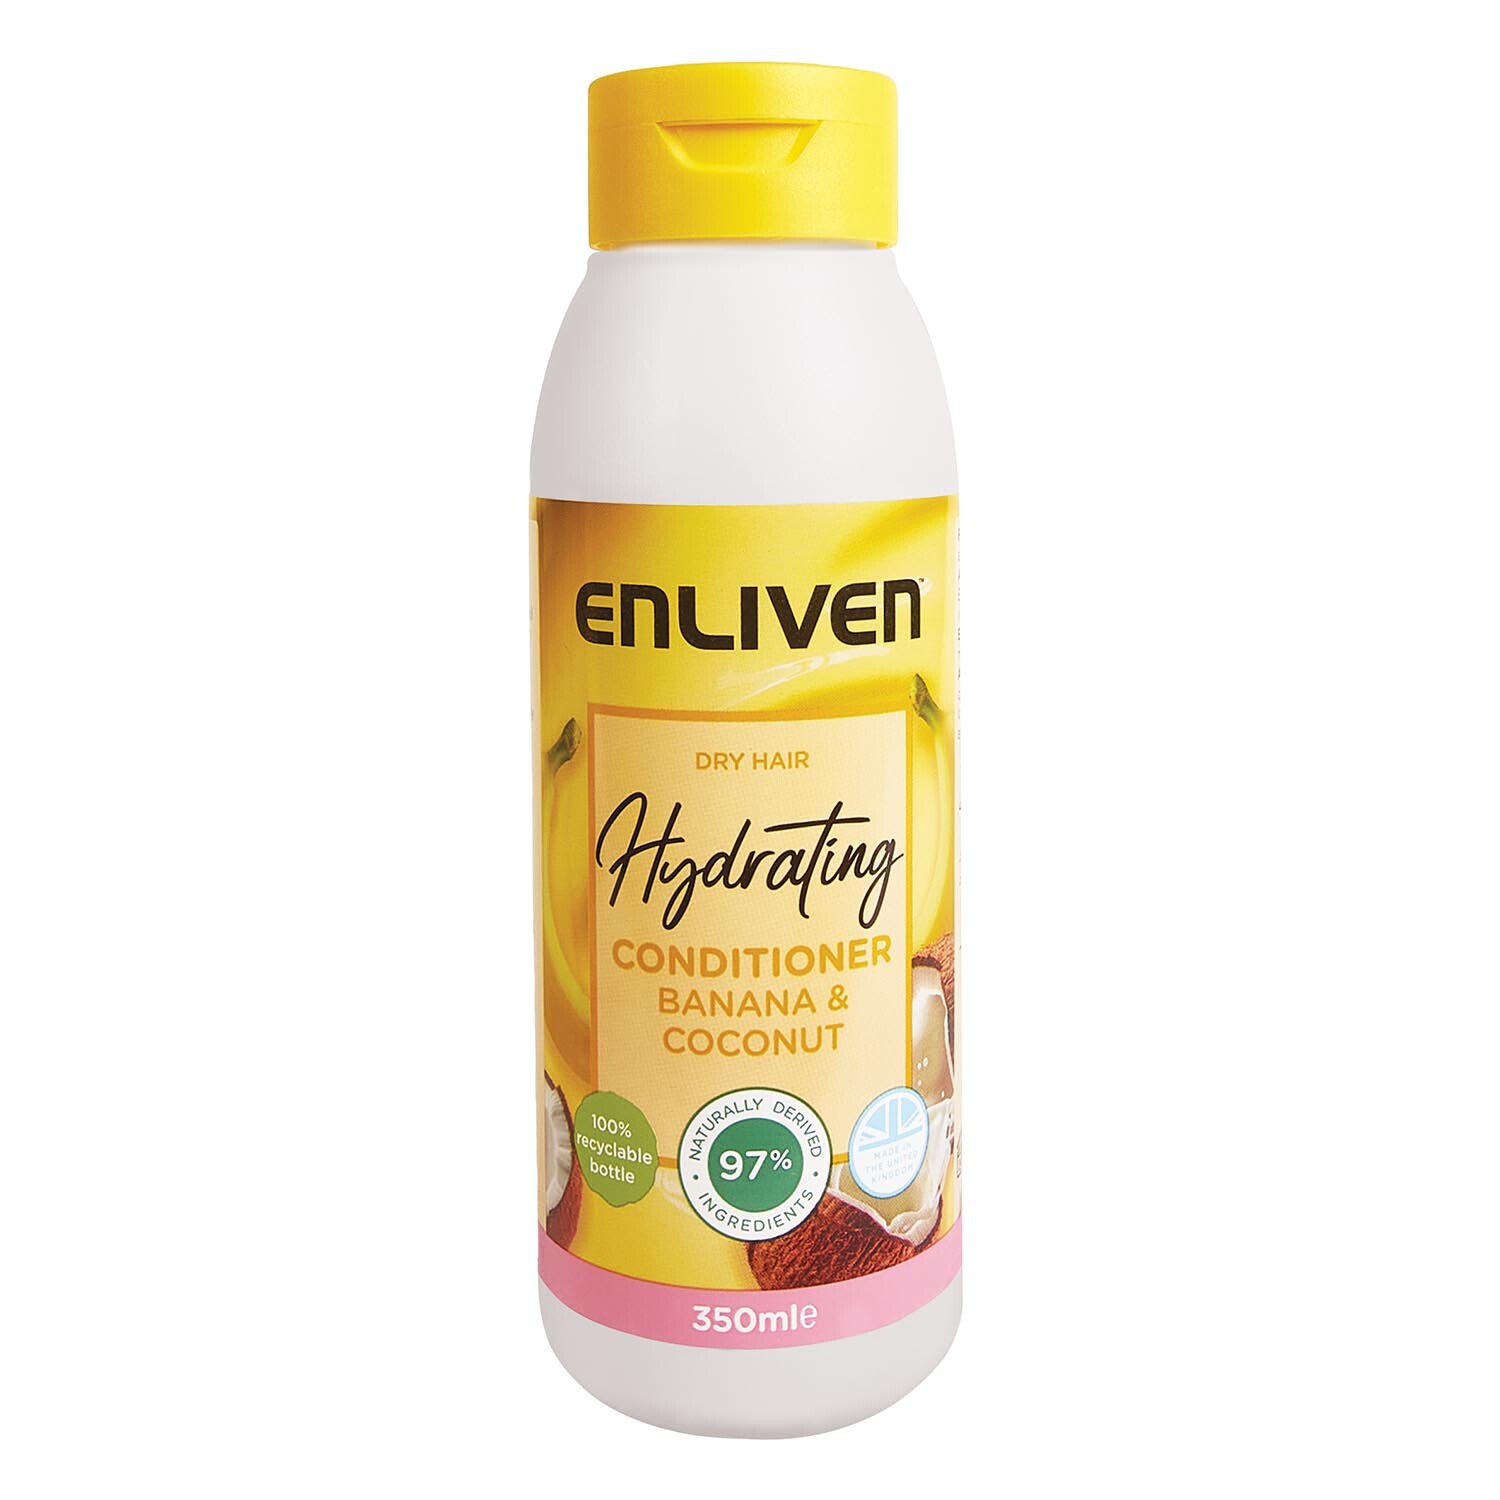 Enliven Hydrating Banana and Coconut Conditioner Image